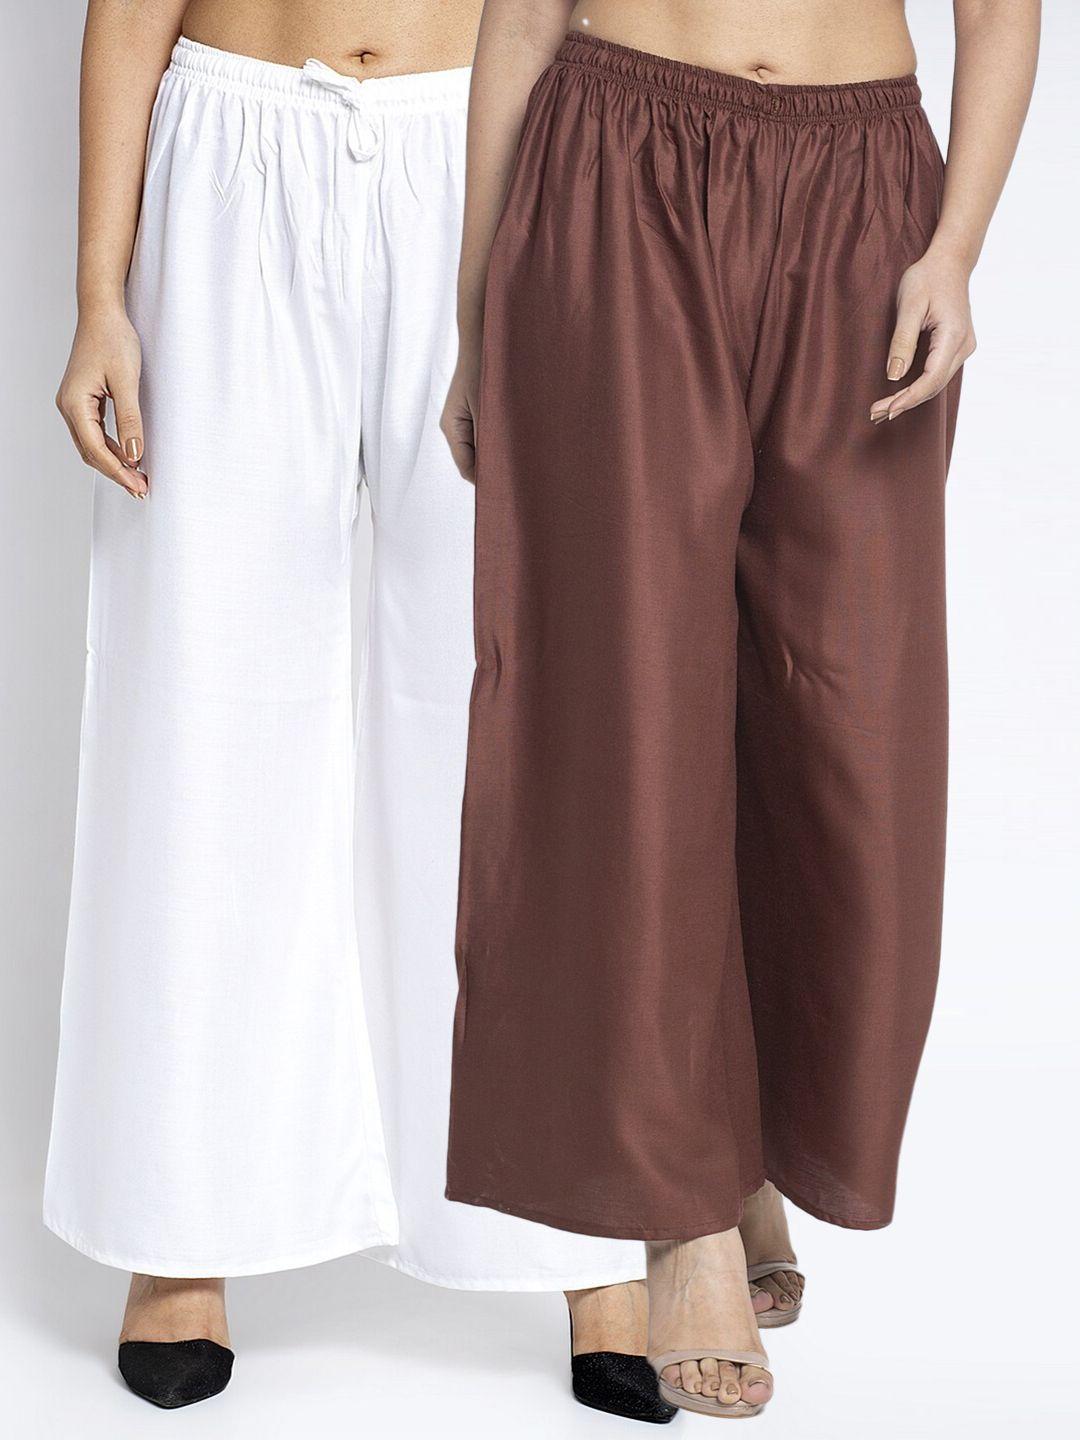 gracit women set of 2 white & brown solid ethnic palazzos